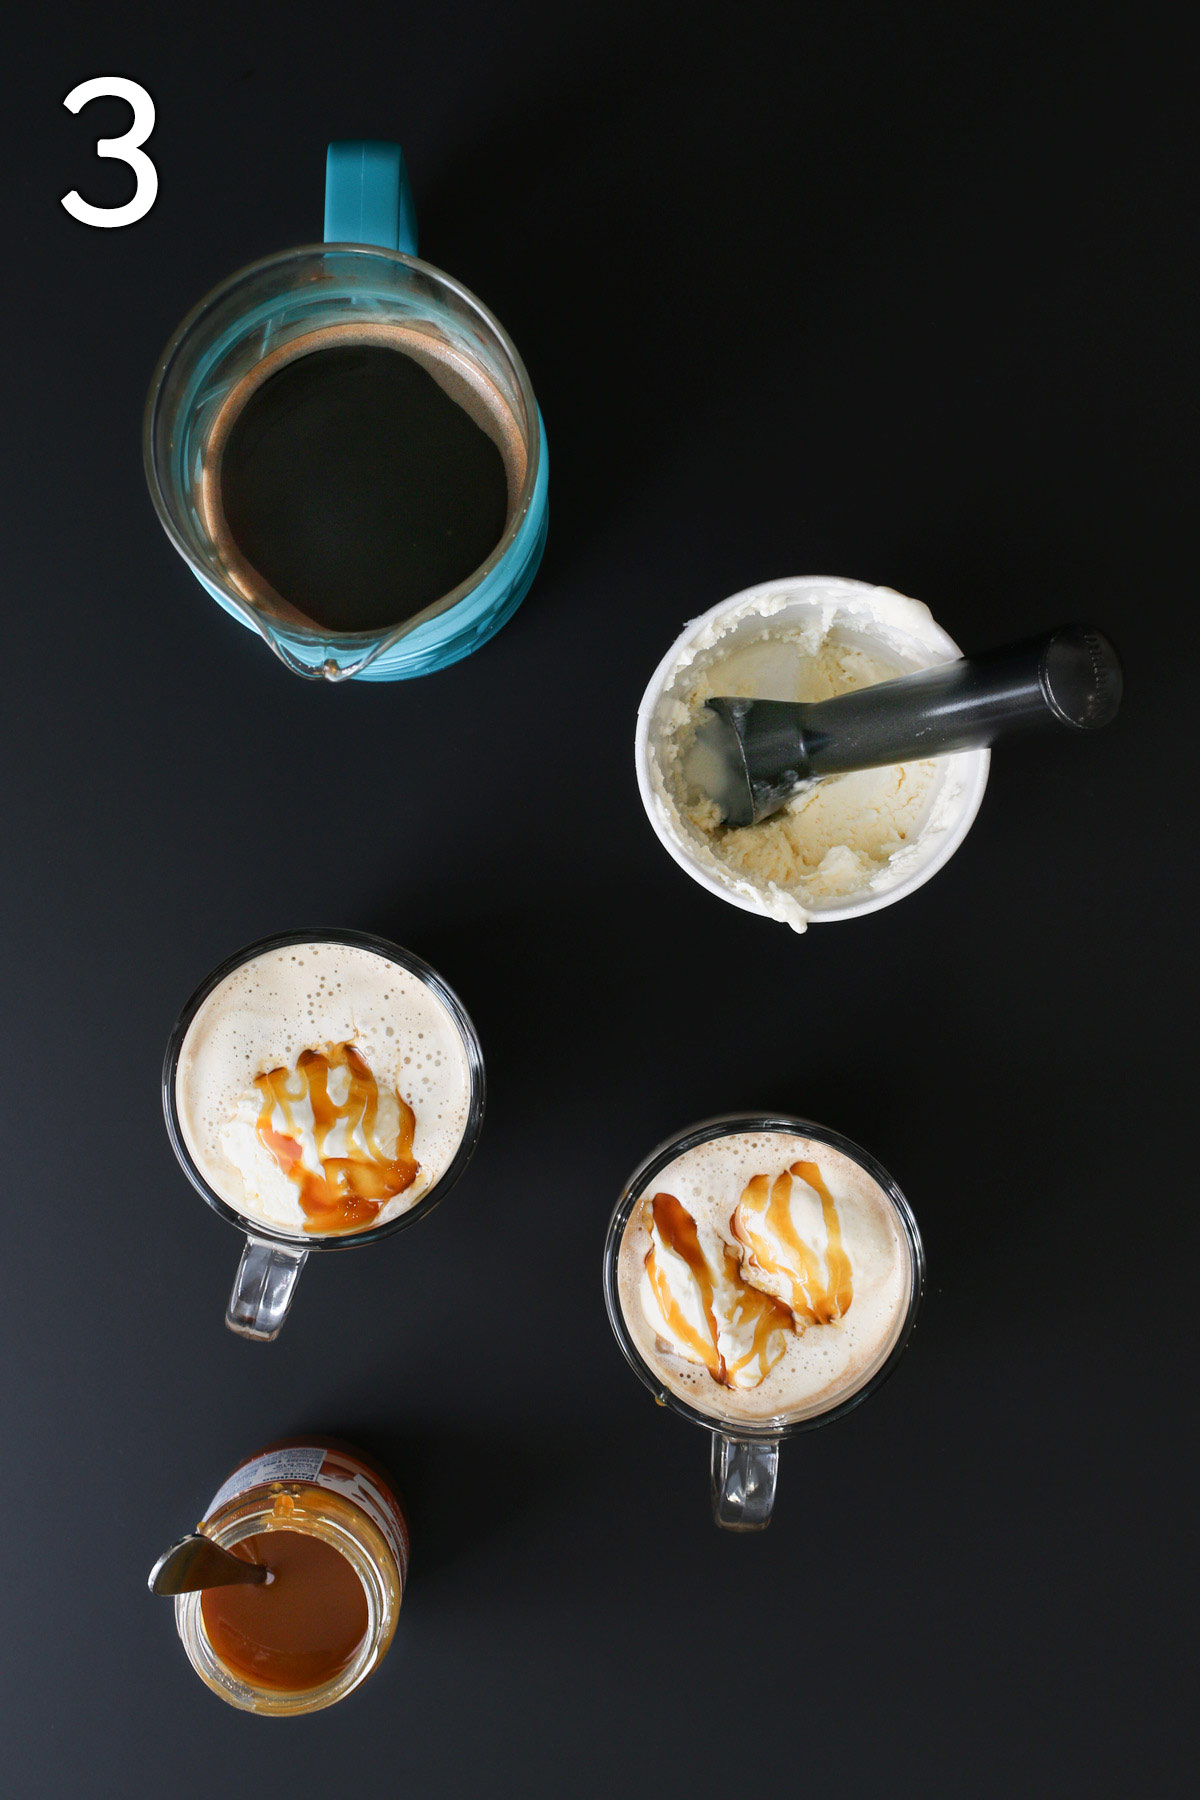 caramel is drizzled on the ice cream foam in the mugs, with a jar of caramel nearby.